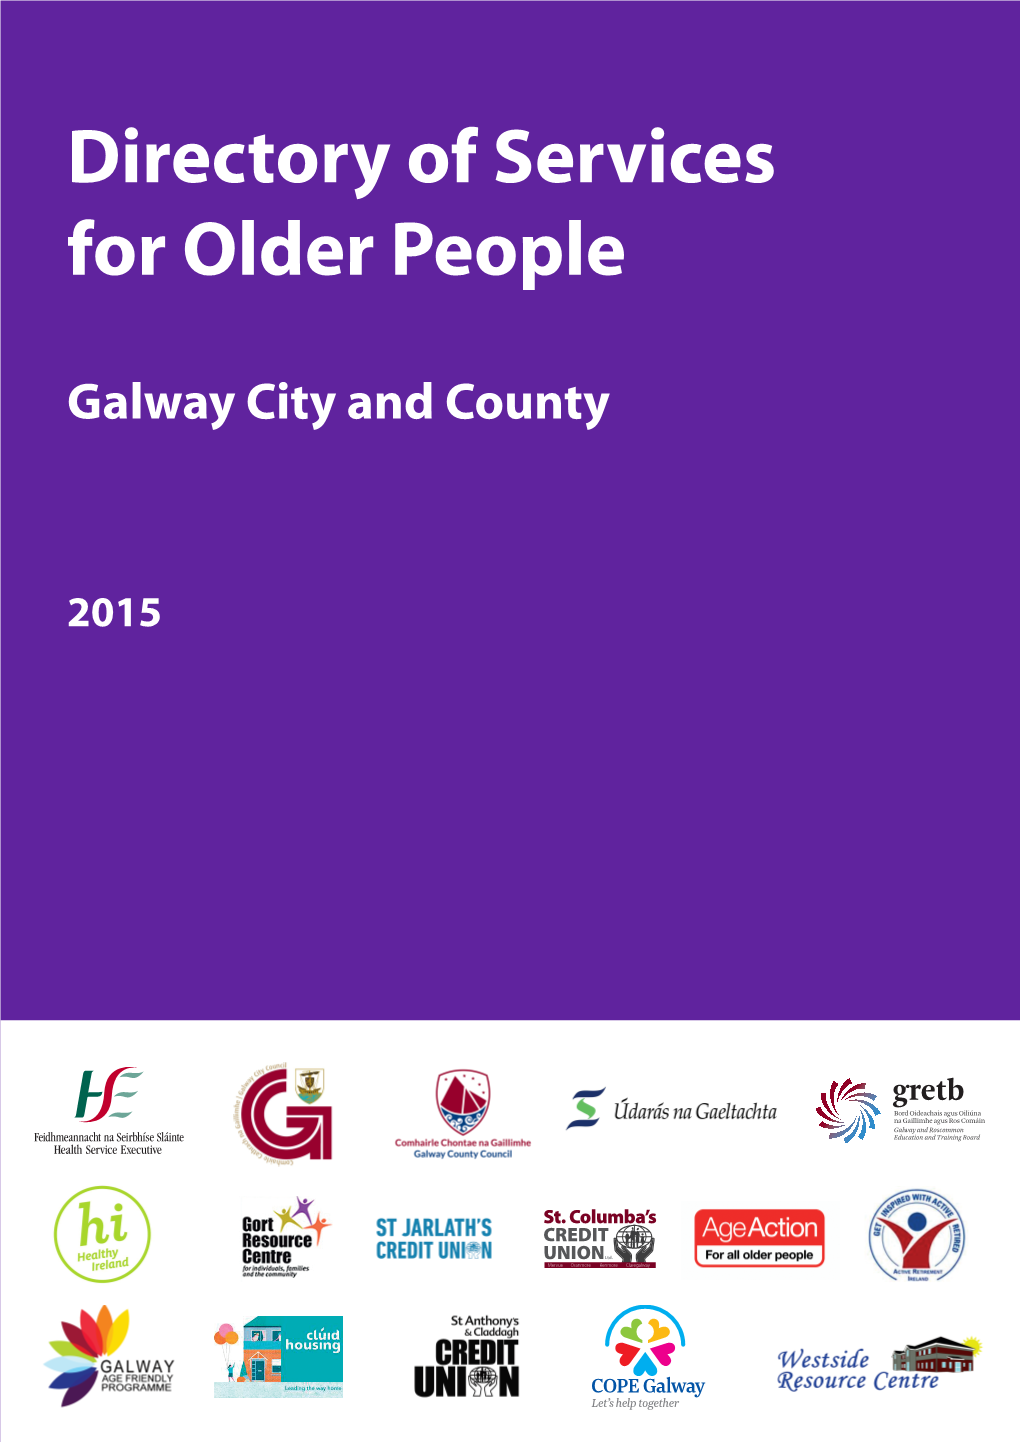 Directory of Services for Older People